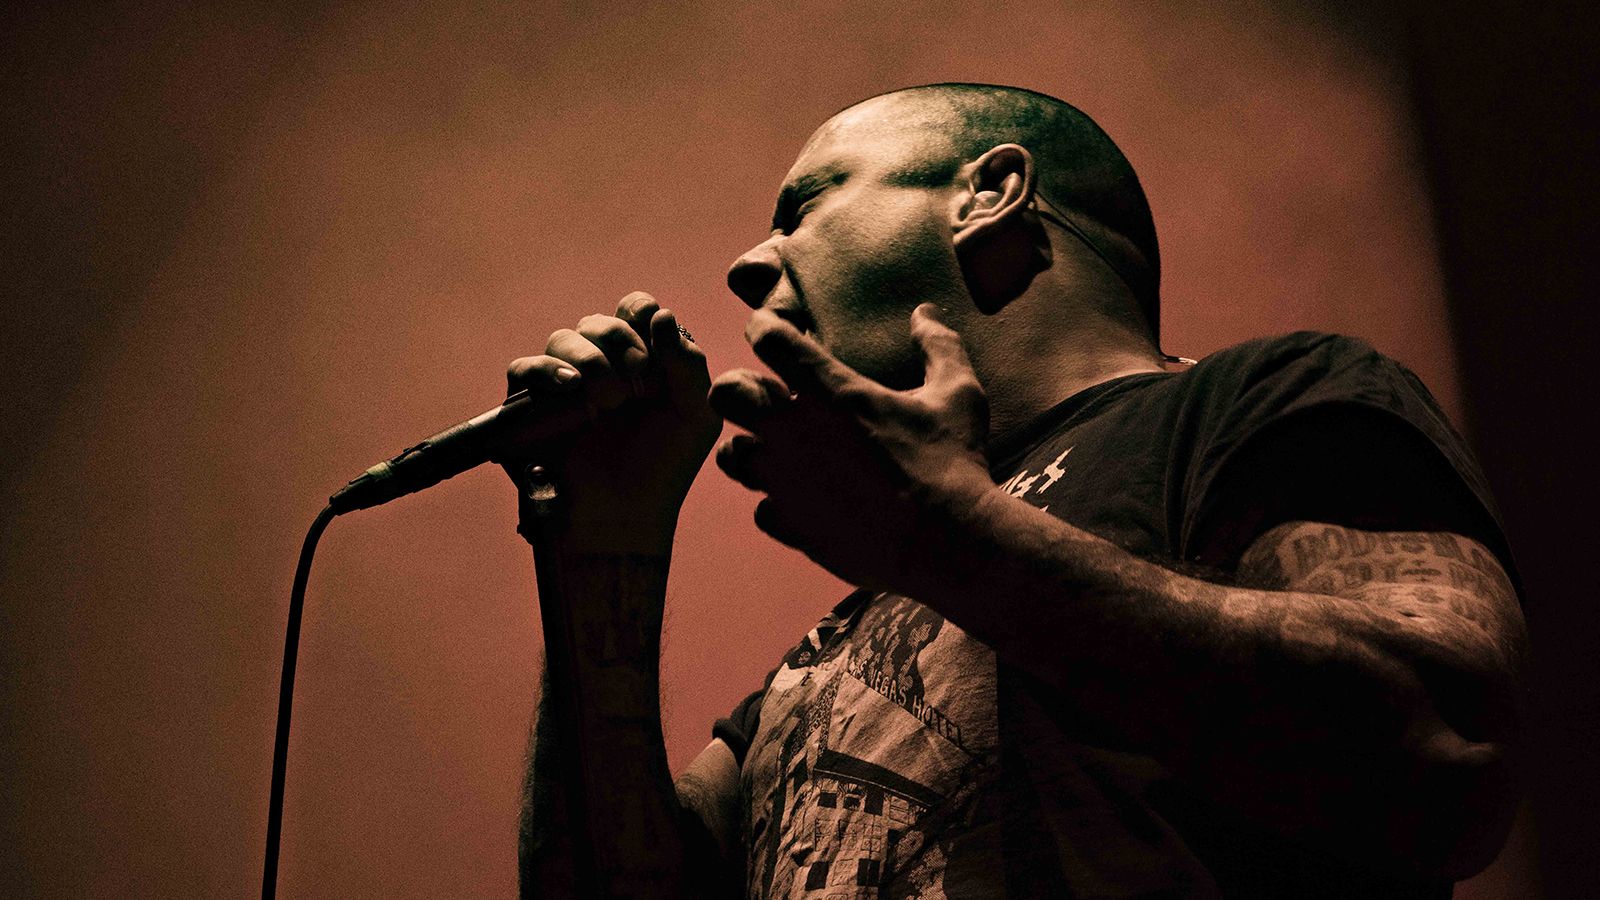 See Philip Anselmo's First Ever Performance Of Pantera's We'll